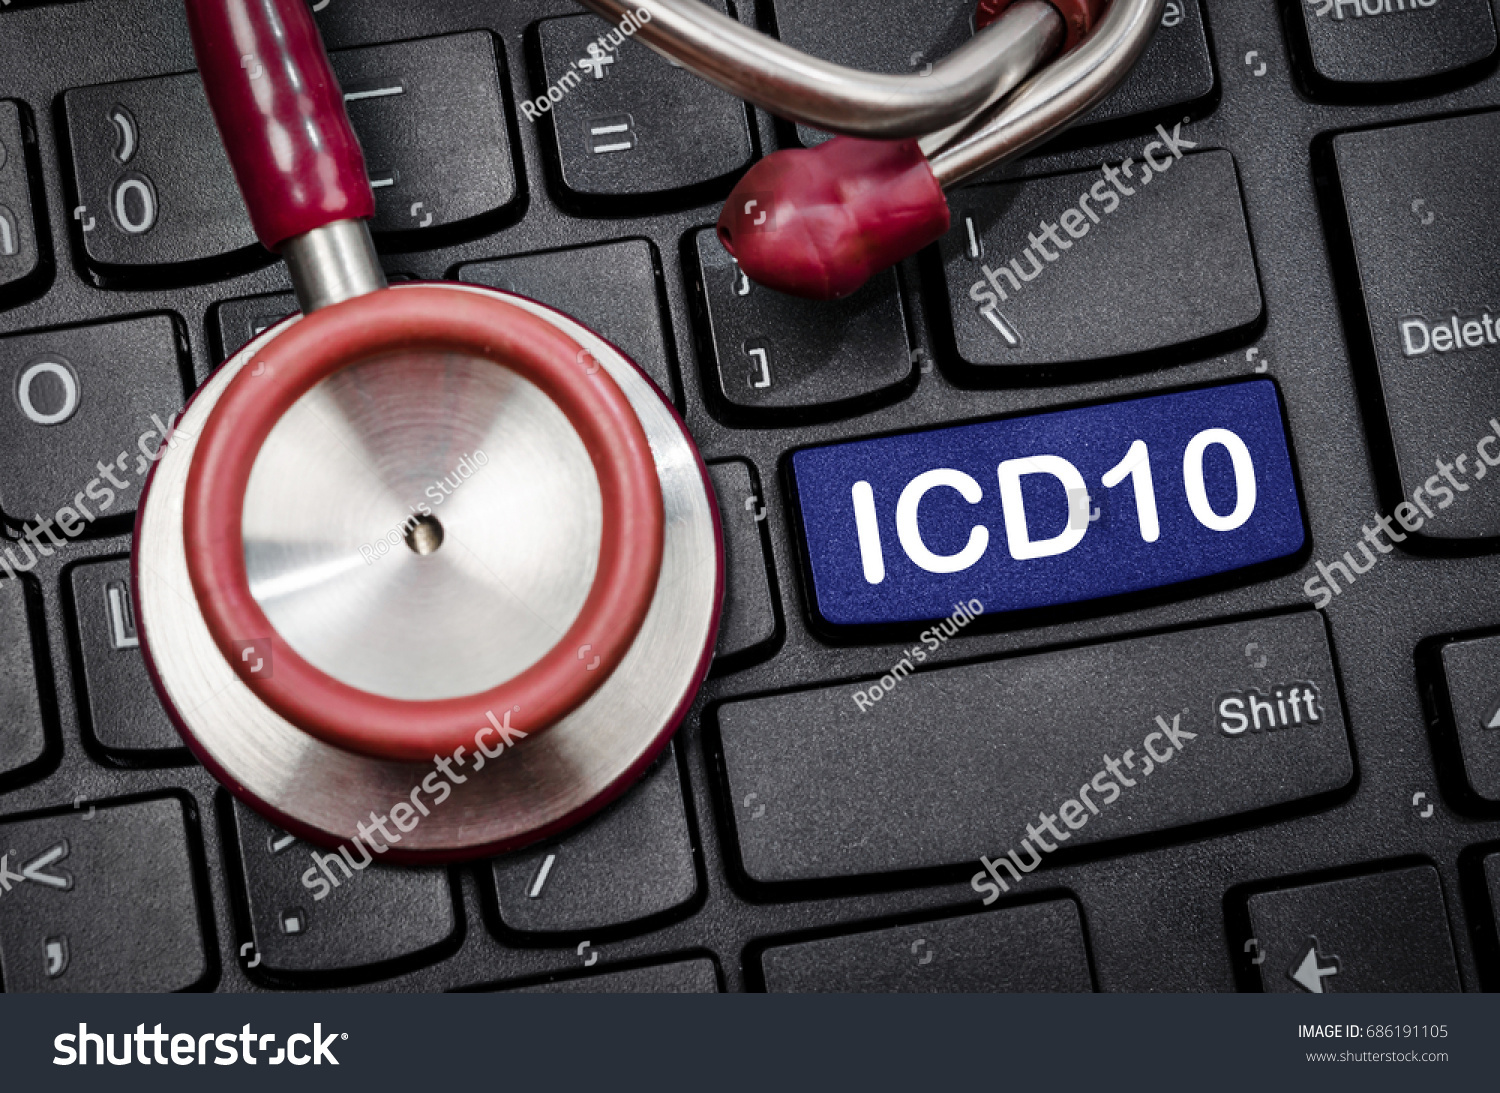 International Classification of Diseases and Related Health Problem 10th Revision or ICD-10 and stethoscope medical on computer keyboard. #686191105